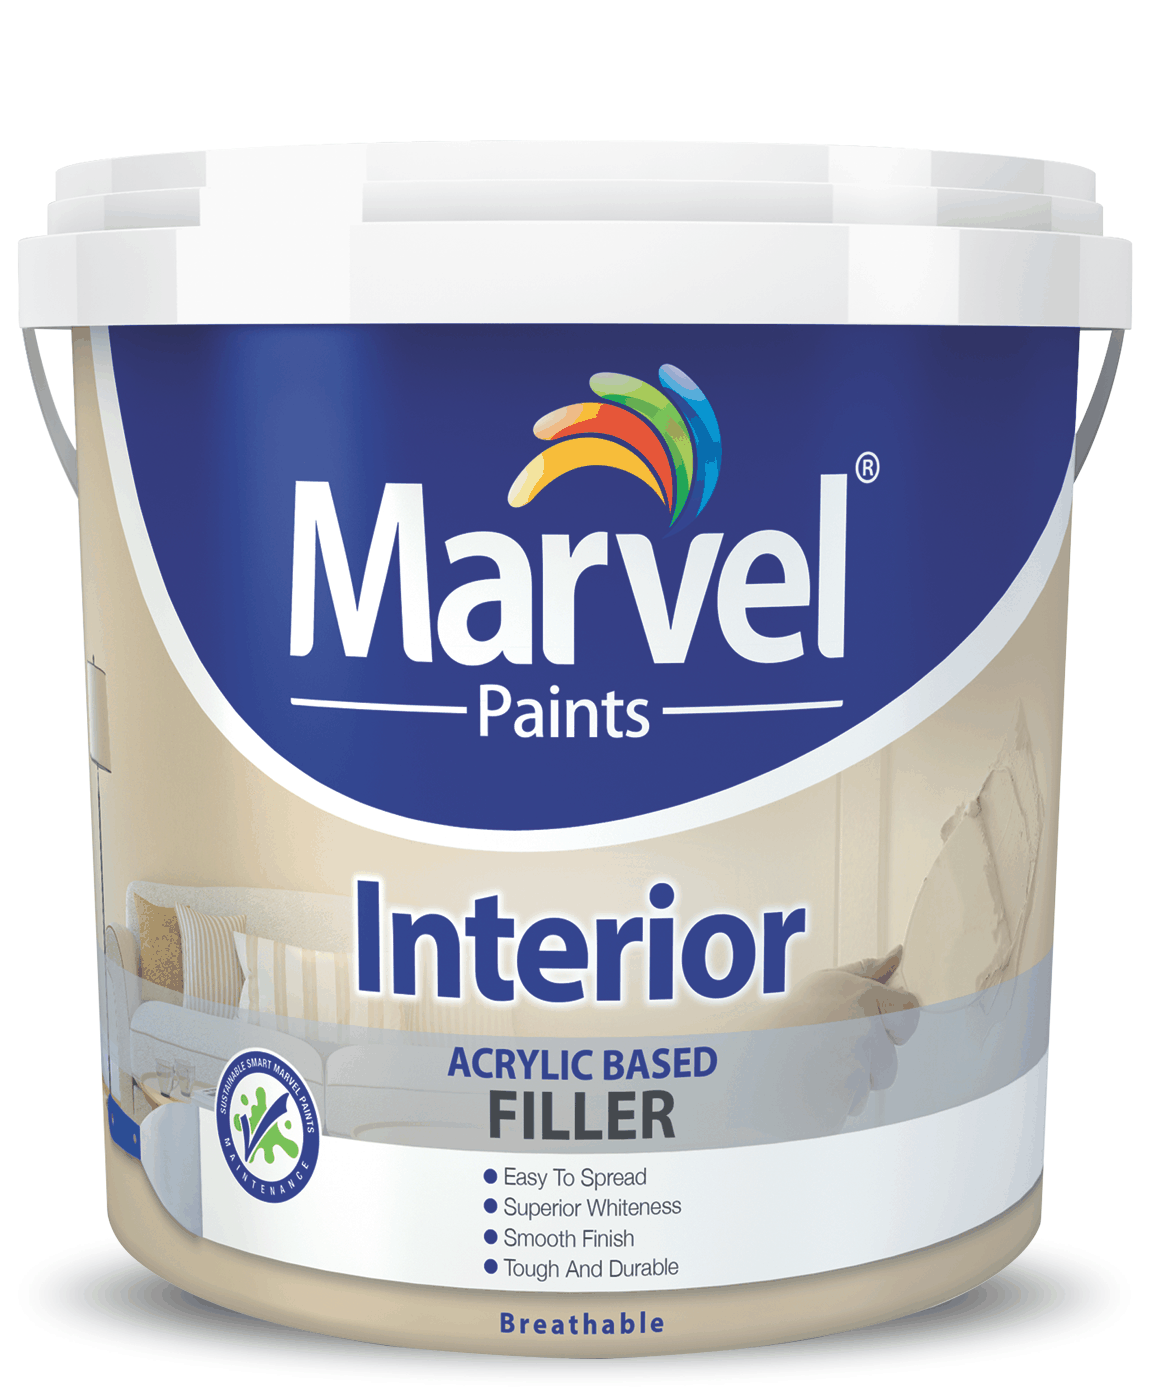 Interior Acrylic Based Filler Marvel Paint Industries